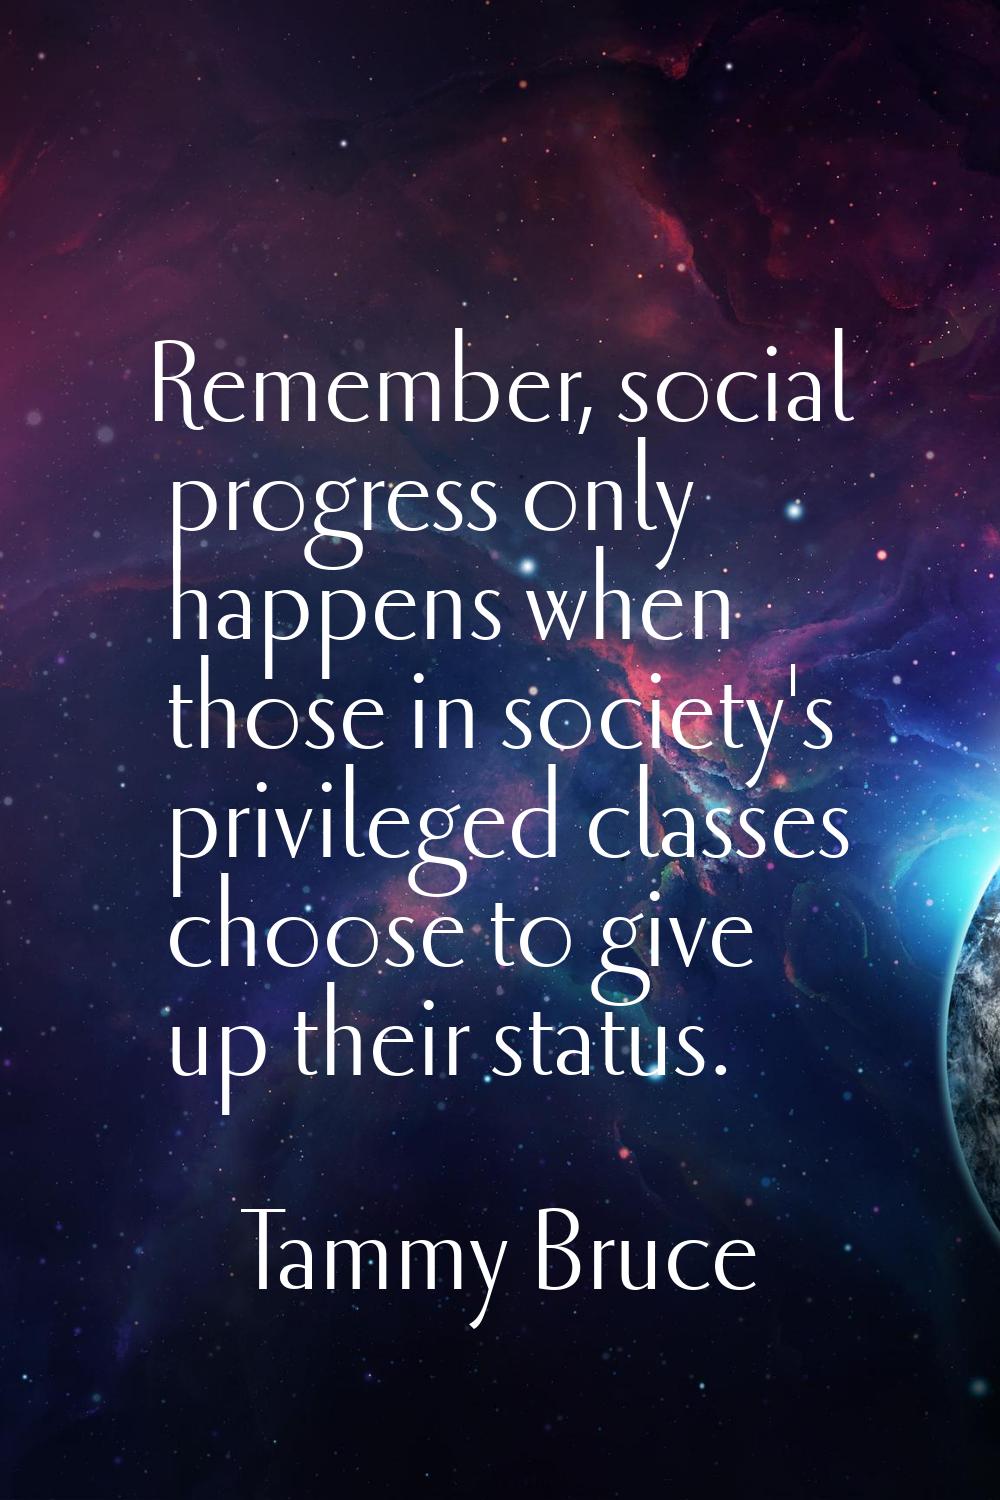 Remember, social progress only happens when those in society's privileged classes choose to give up